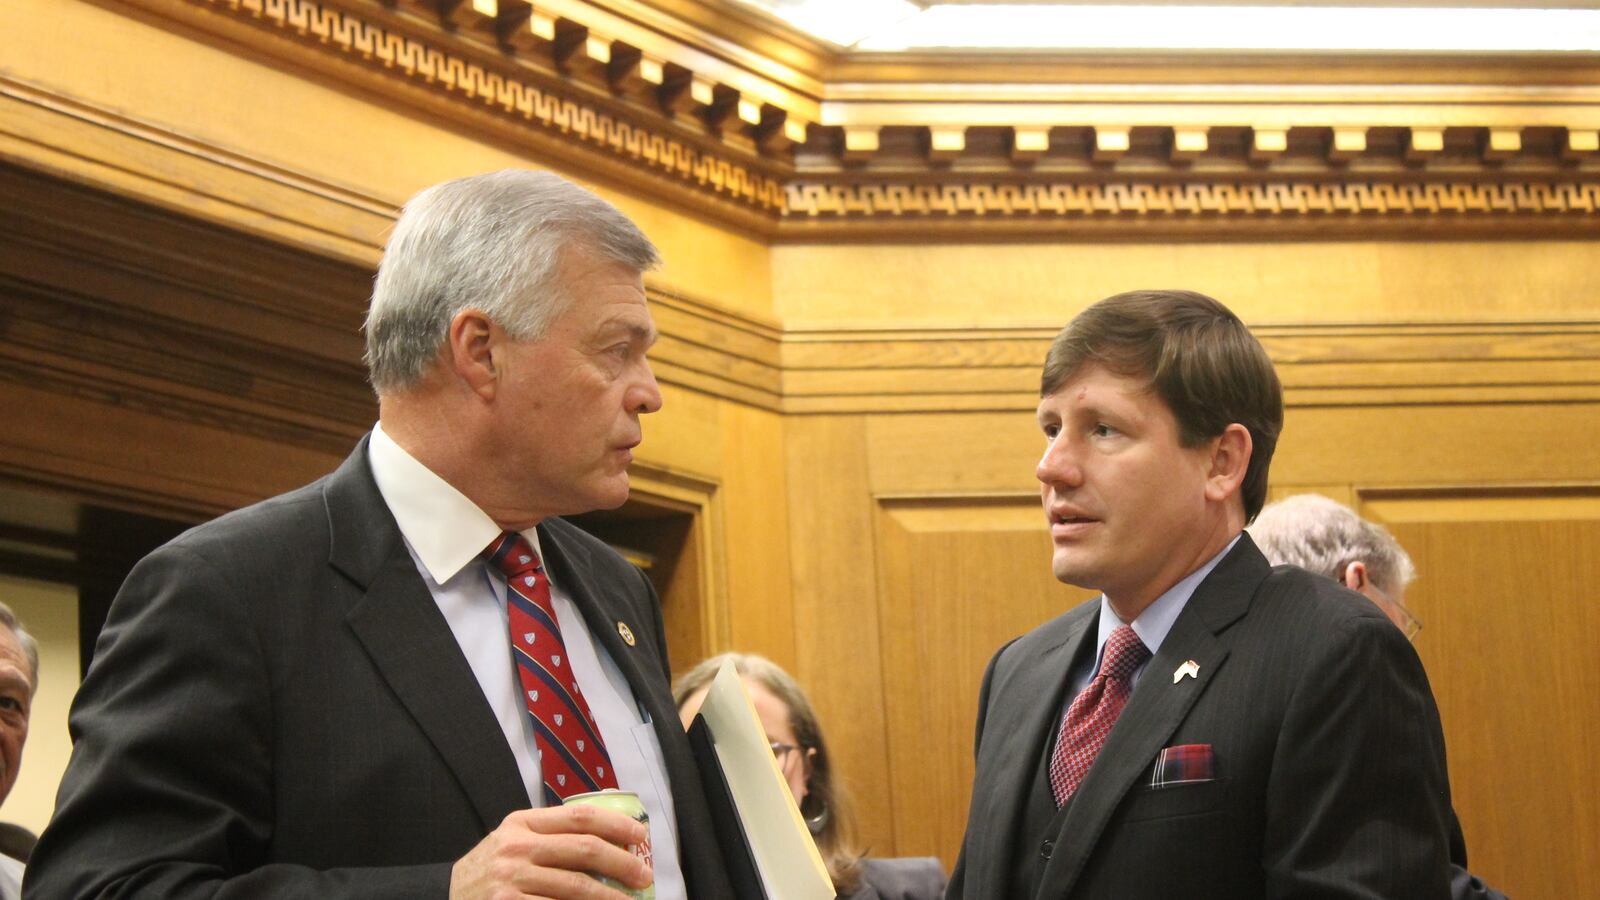 From left: Sen. Jim Tracy of Shelbyville confers with Sen. Brian Kelsey of Germantown before the Senate Education Committee considered Kelsey's bill on March 8 to expand the state's vouchers program for students with disabilities.